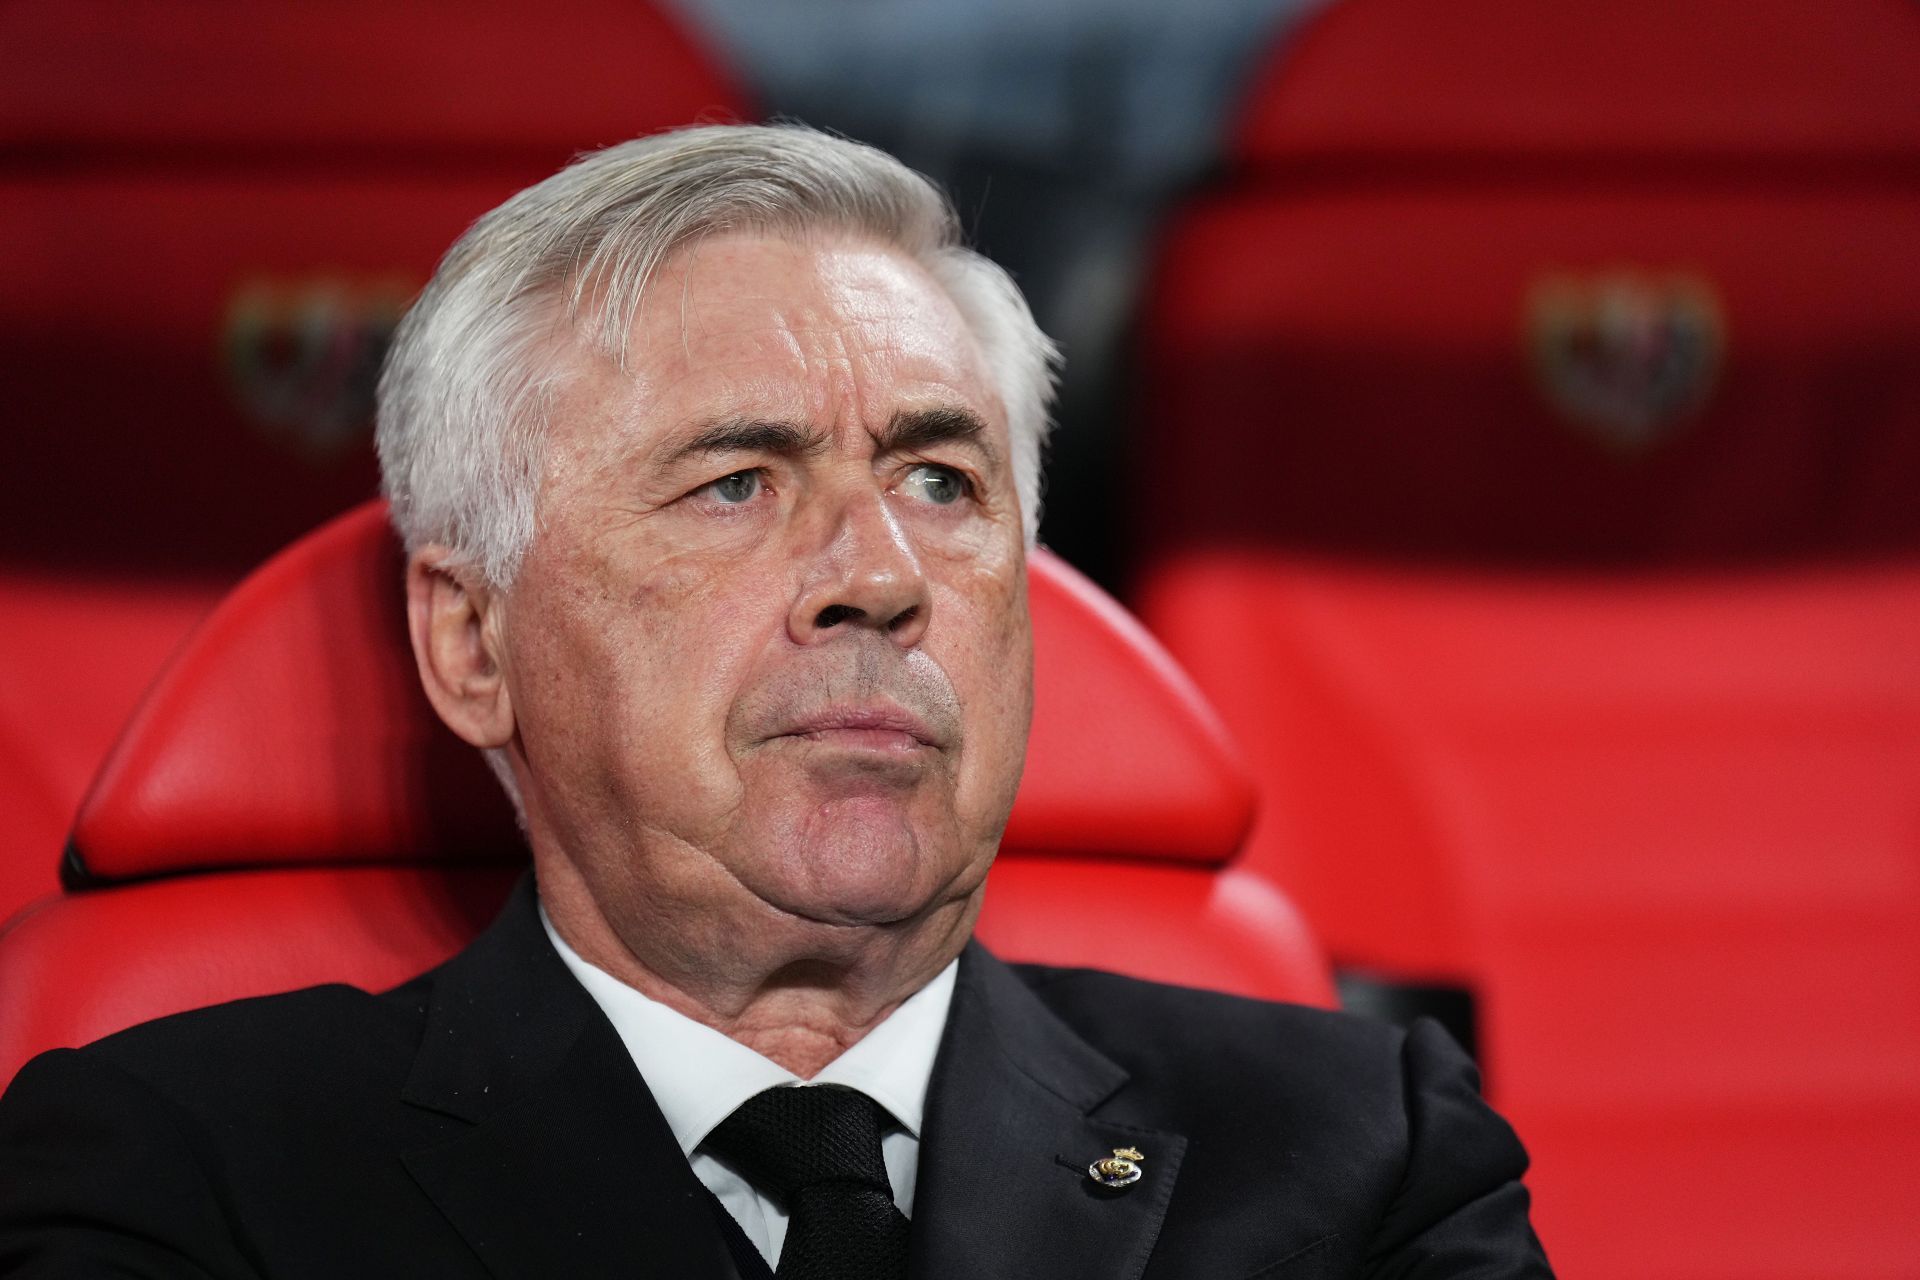 Ancelotti has reponded on speculation linking him to the Brazil job.